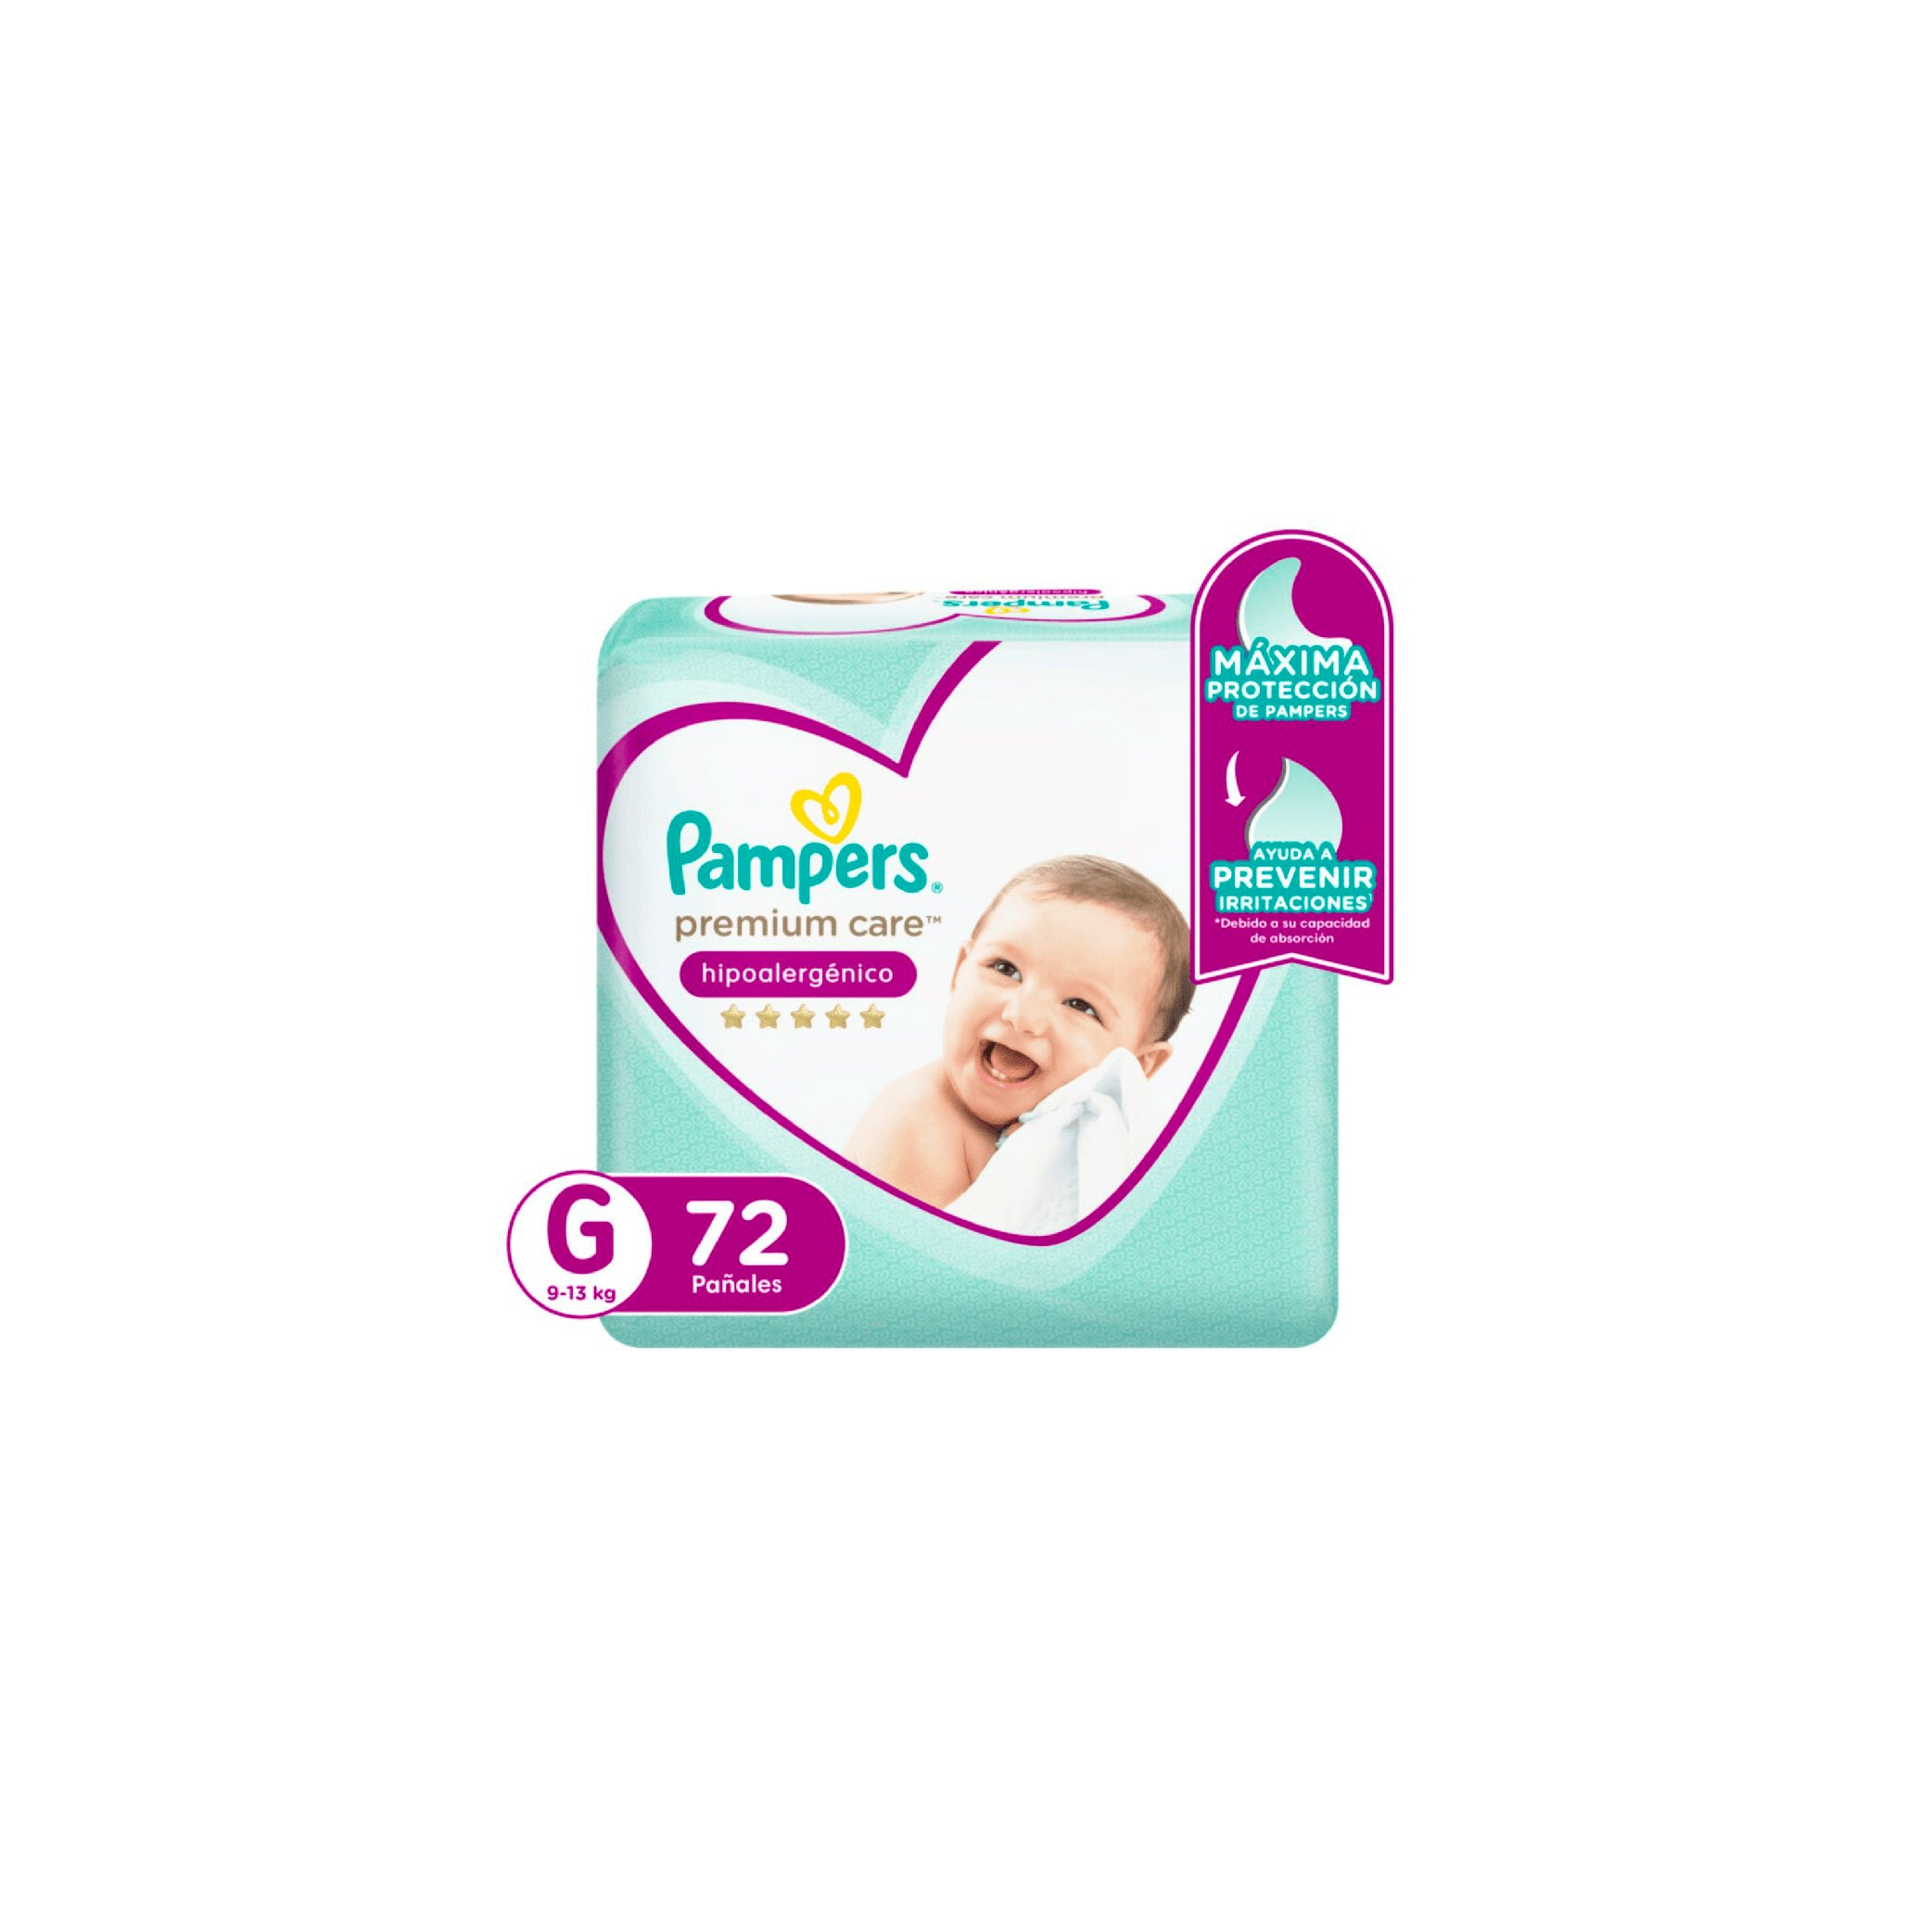 PAMPERS PAÑALES PREMIUM CARE G X72